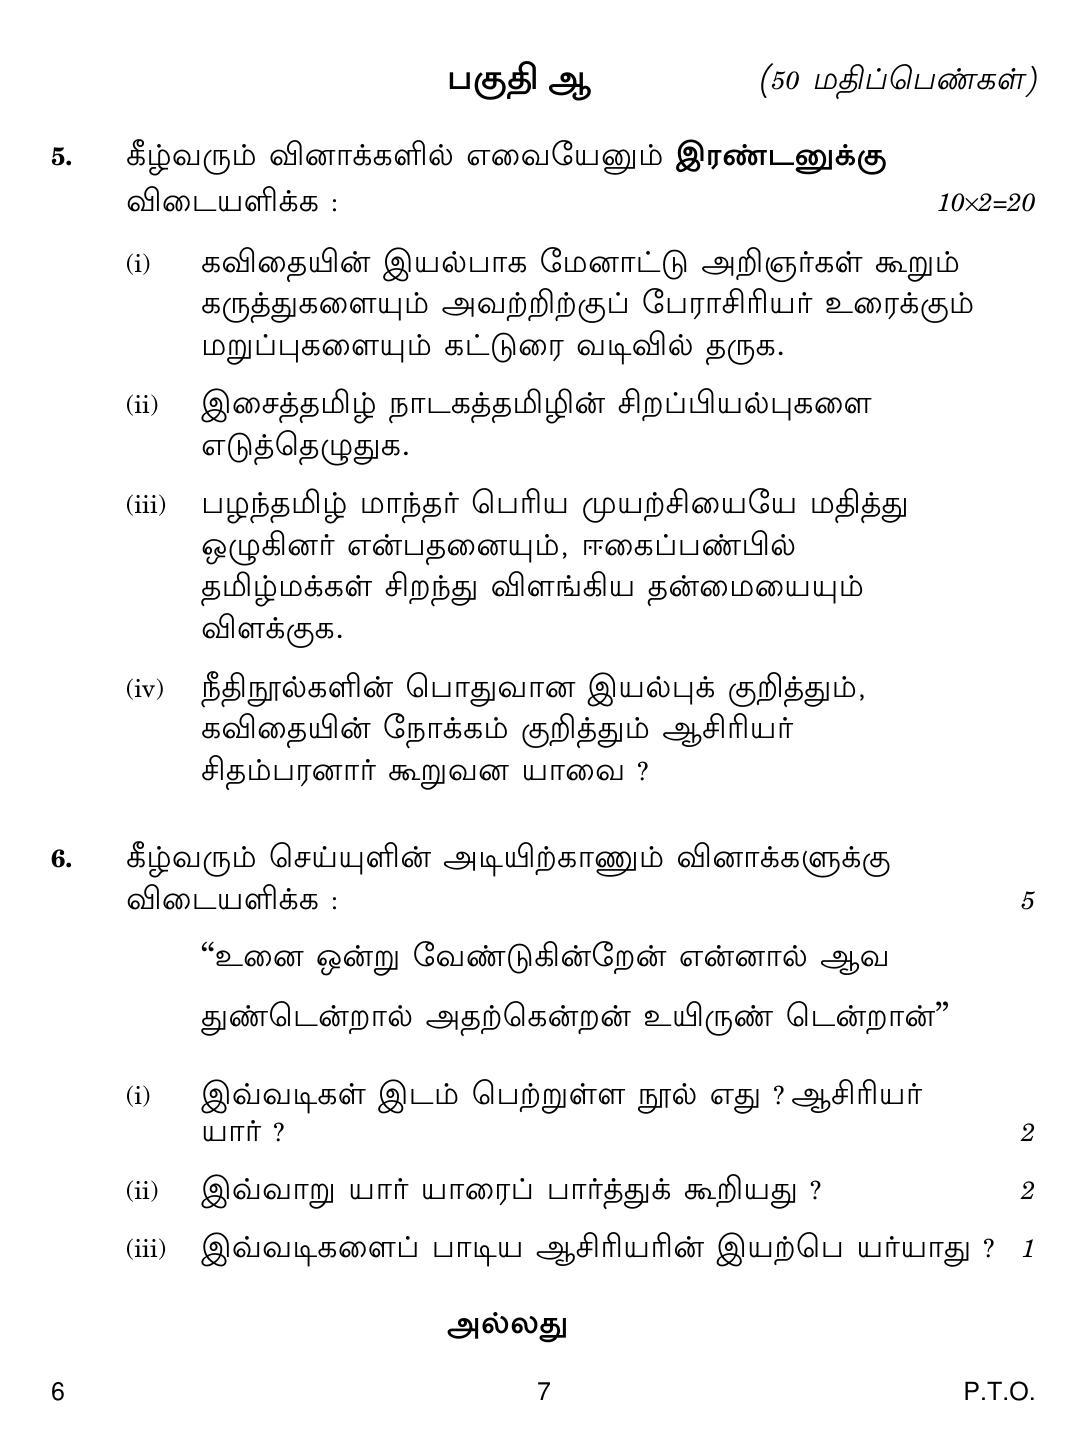 CBSE Class 12 6 Tamil 2018 Question Paper - Page 7